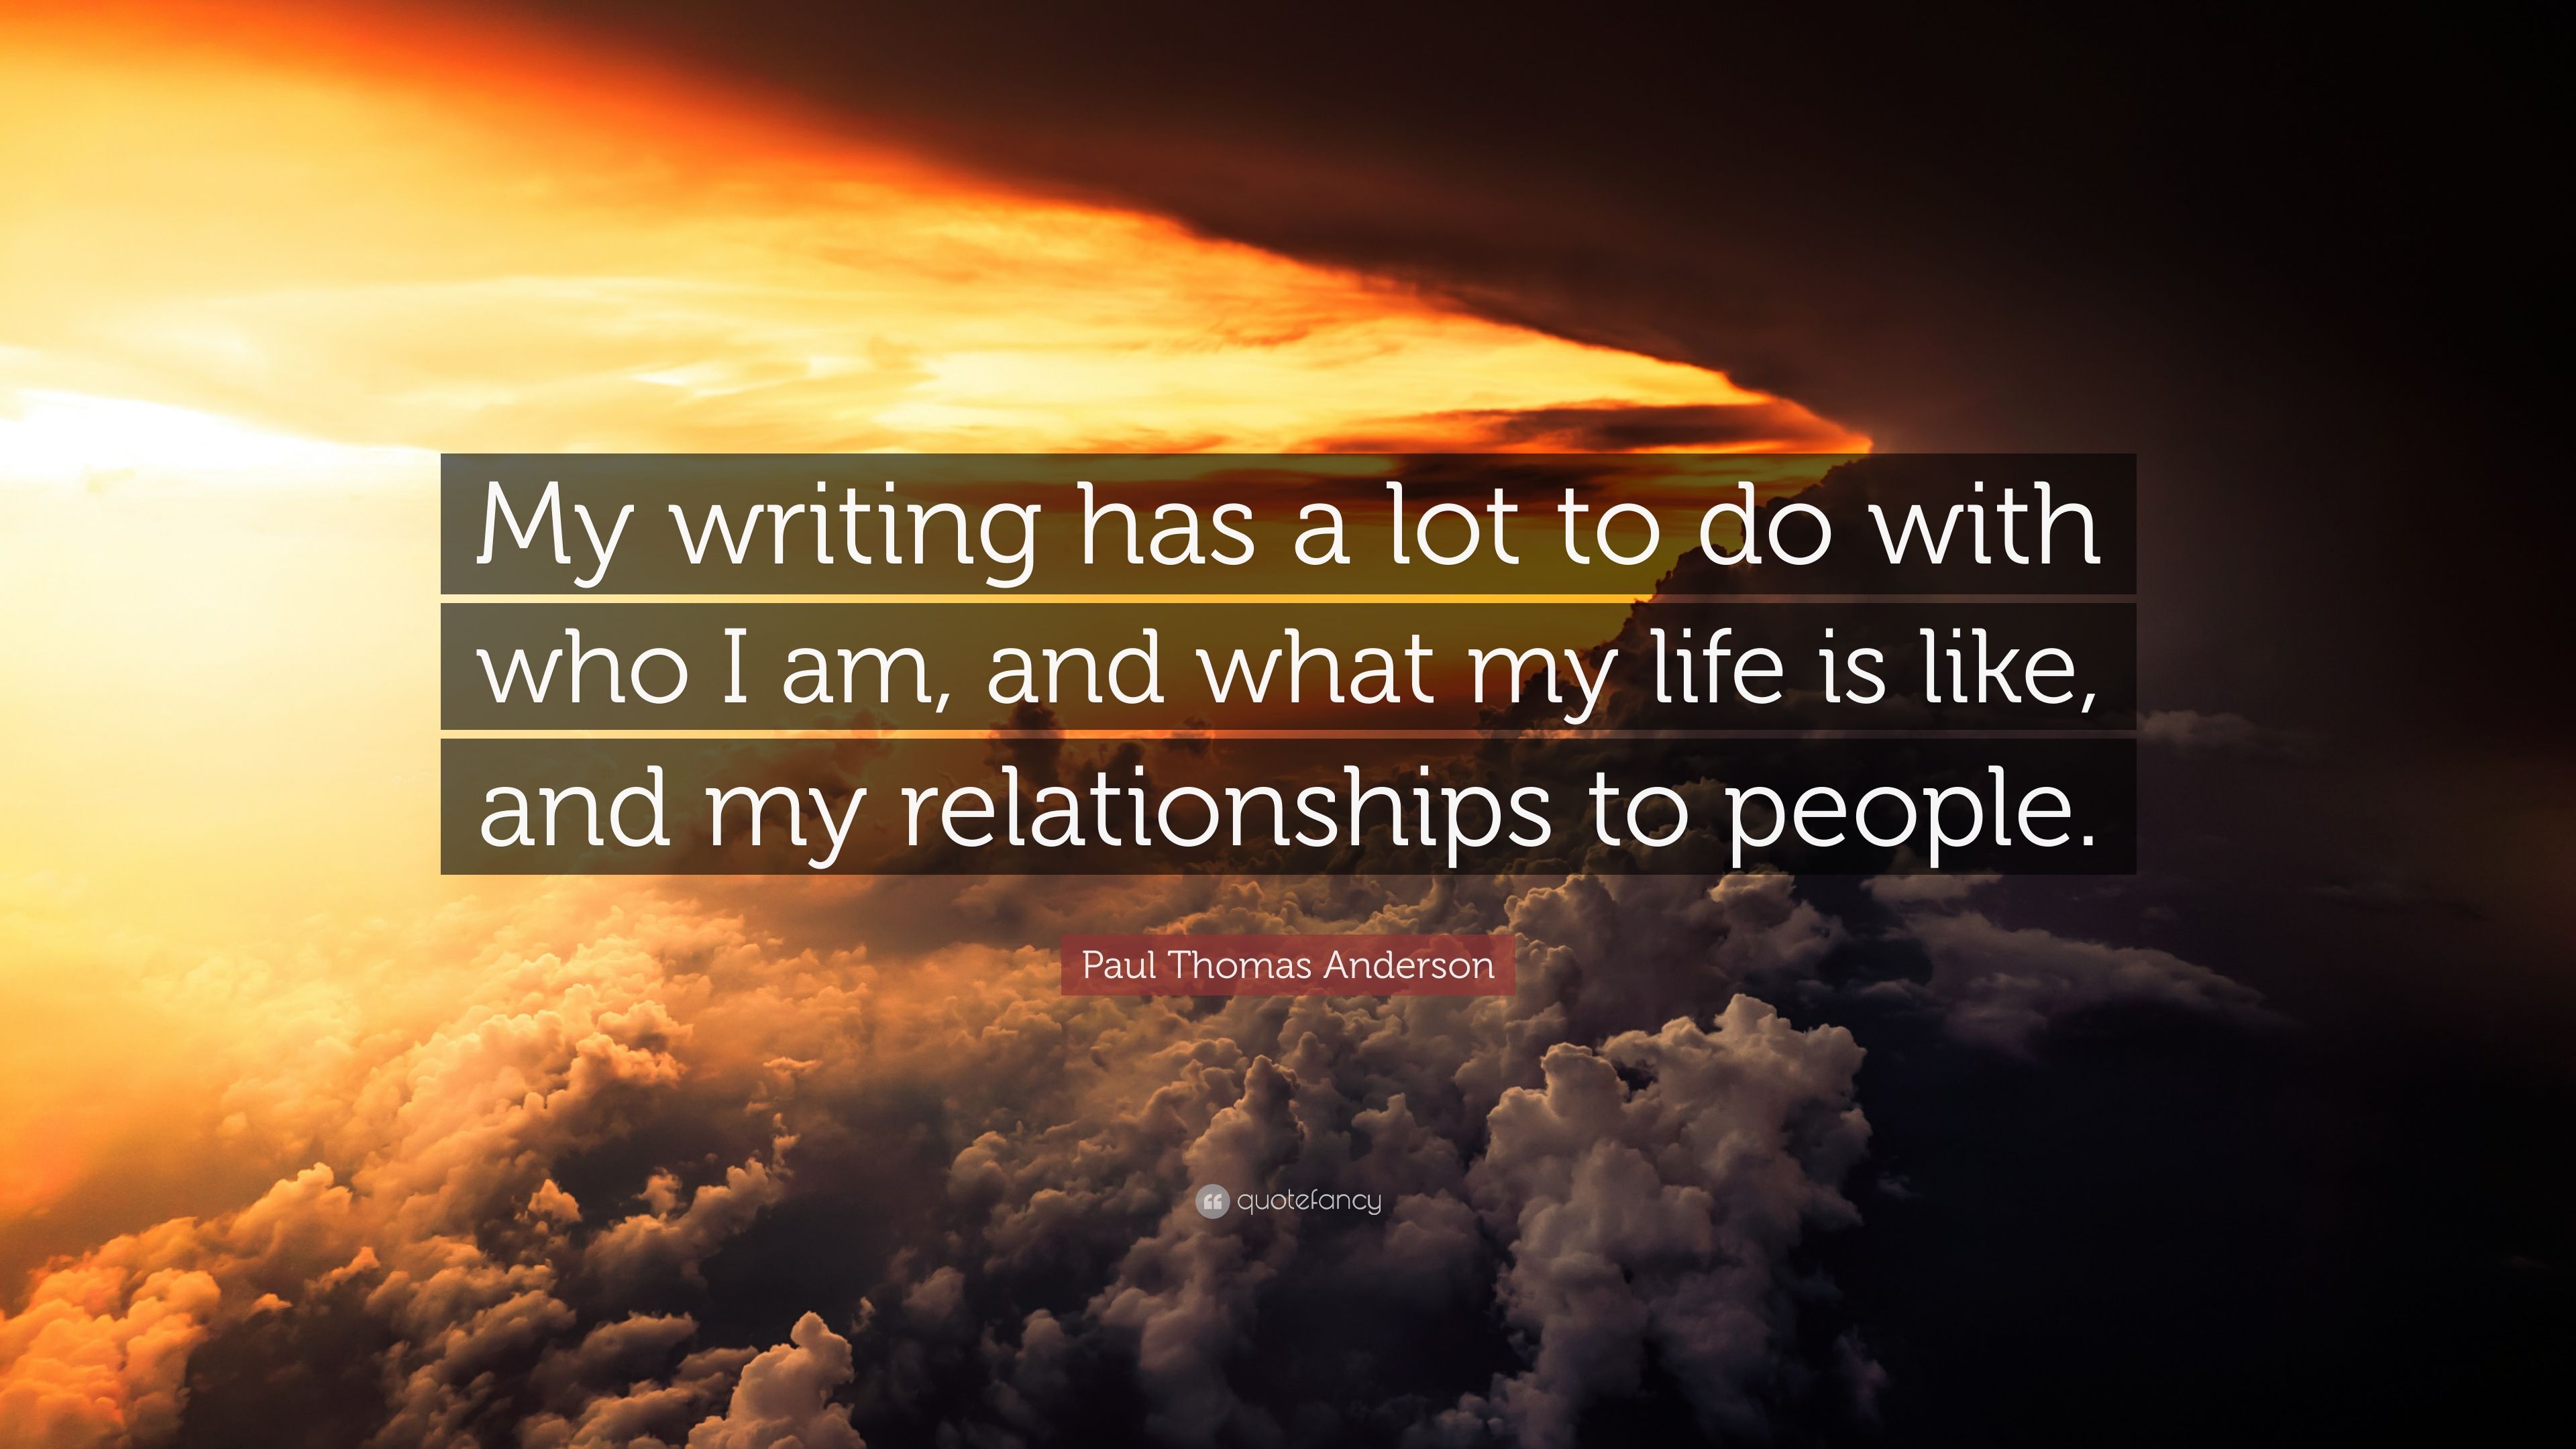 Paul Thomas Anderson Quote: “My writing has a lot to do with who I